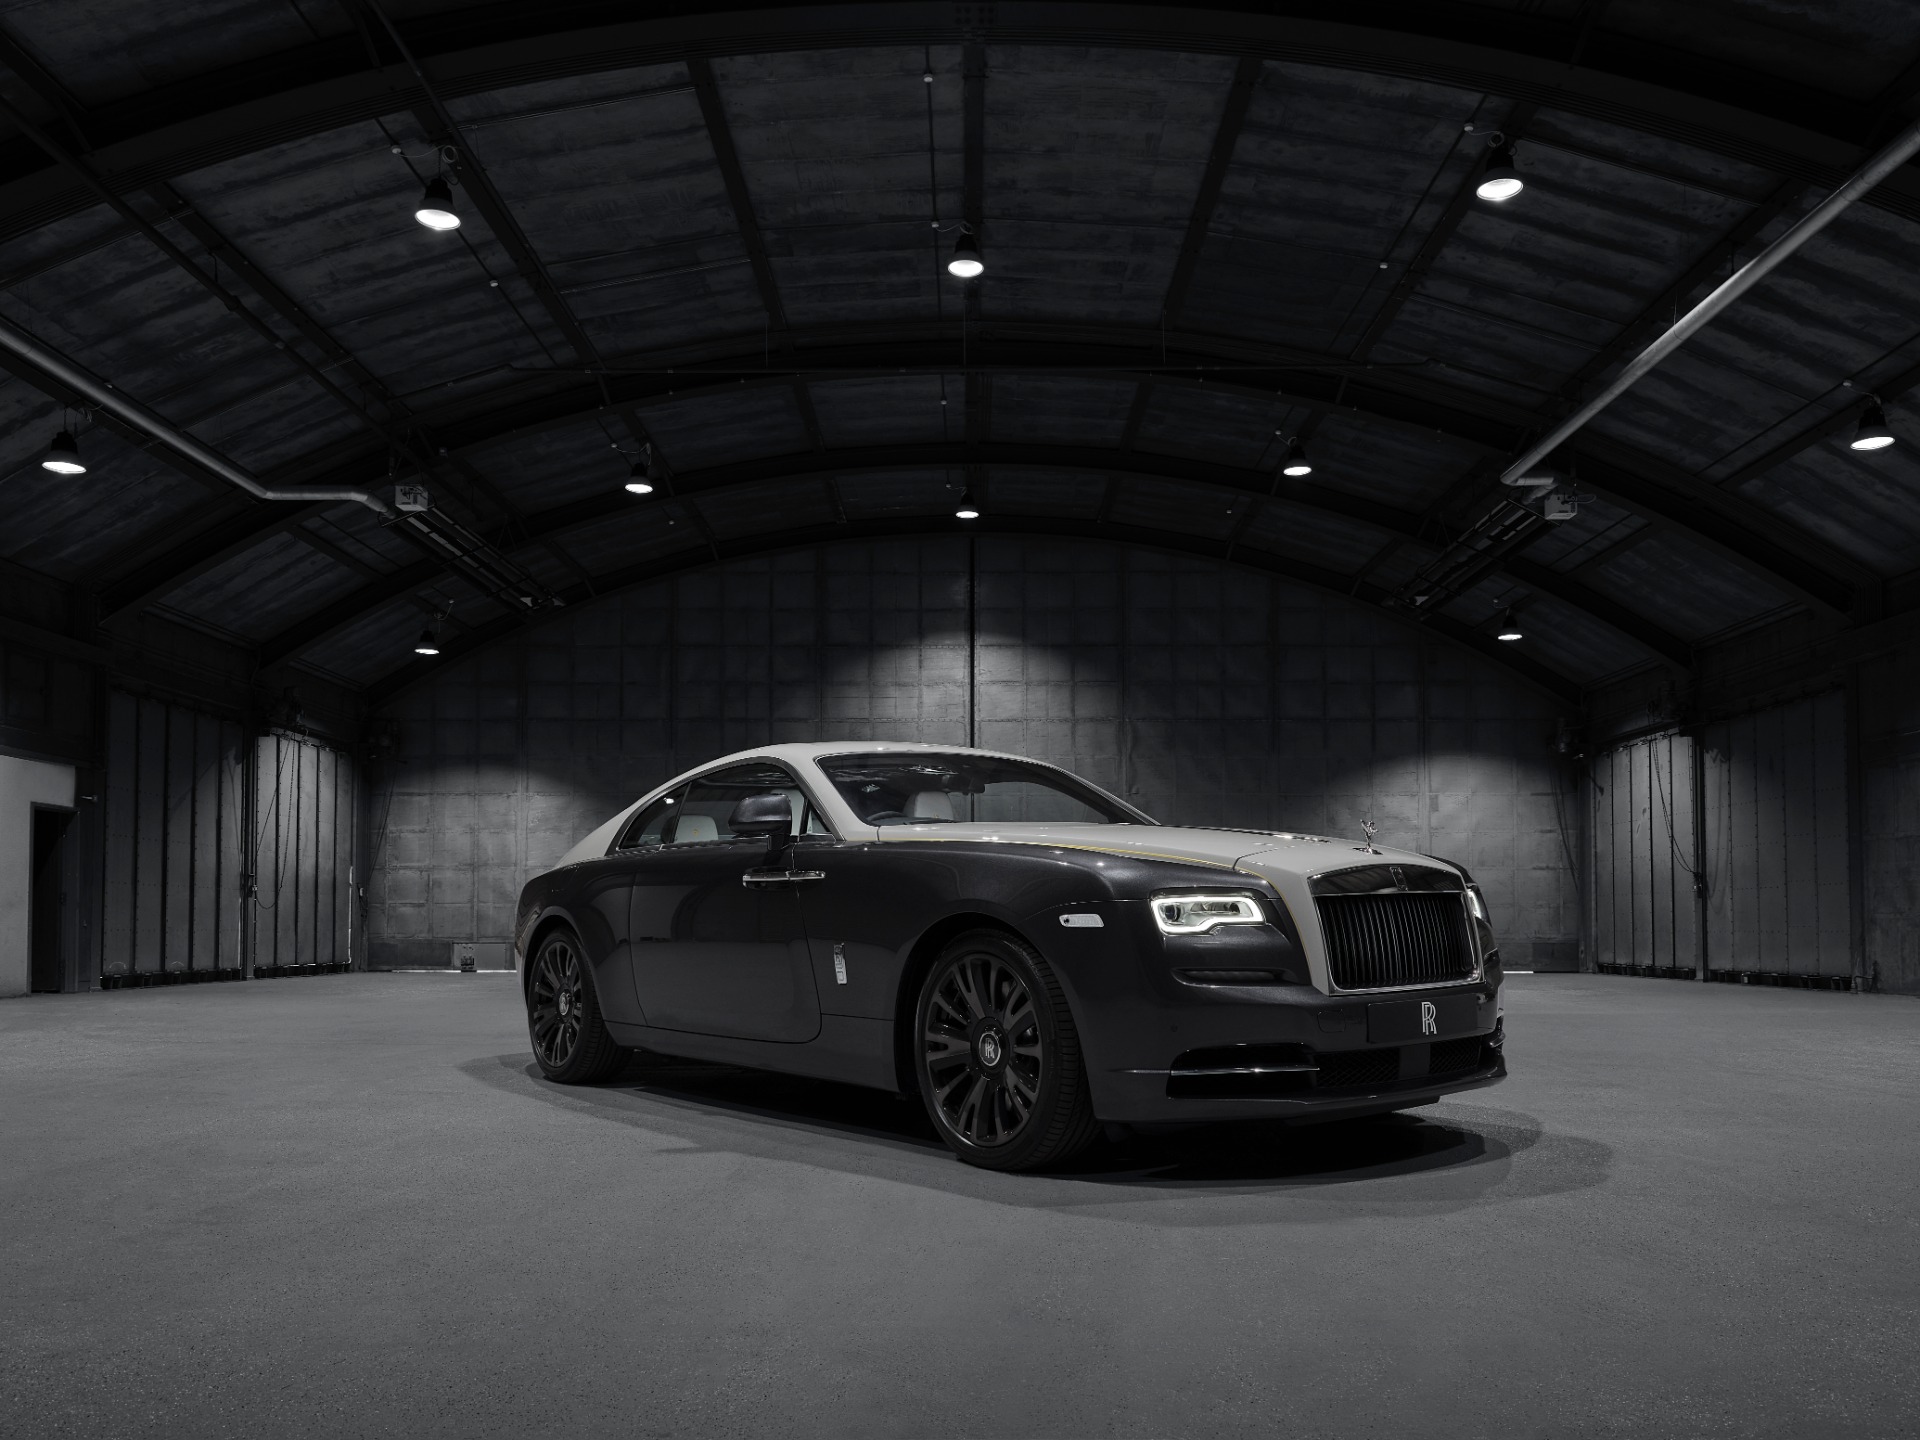 New 2020 Rolls-Royce Wraith Eagle for sale Sold at Bentley Greenwich in Greenwich CT 06830 1